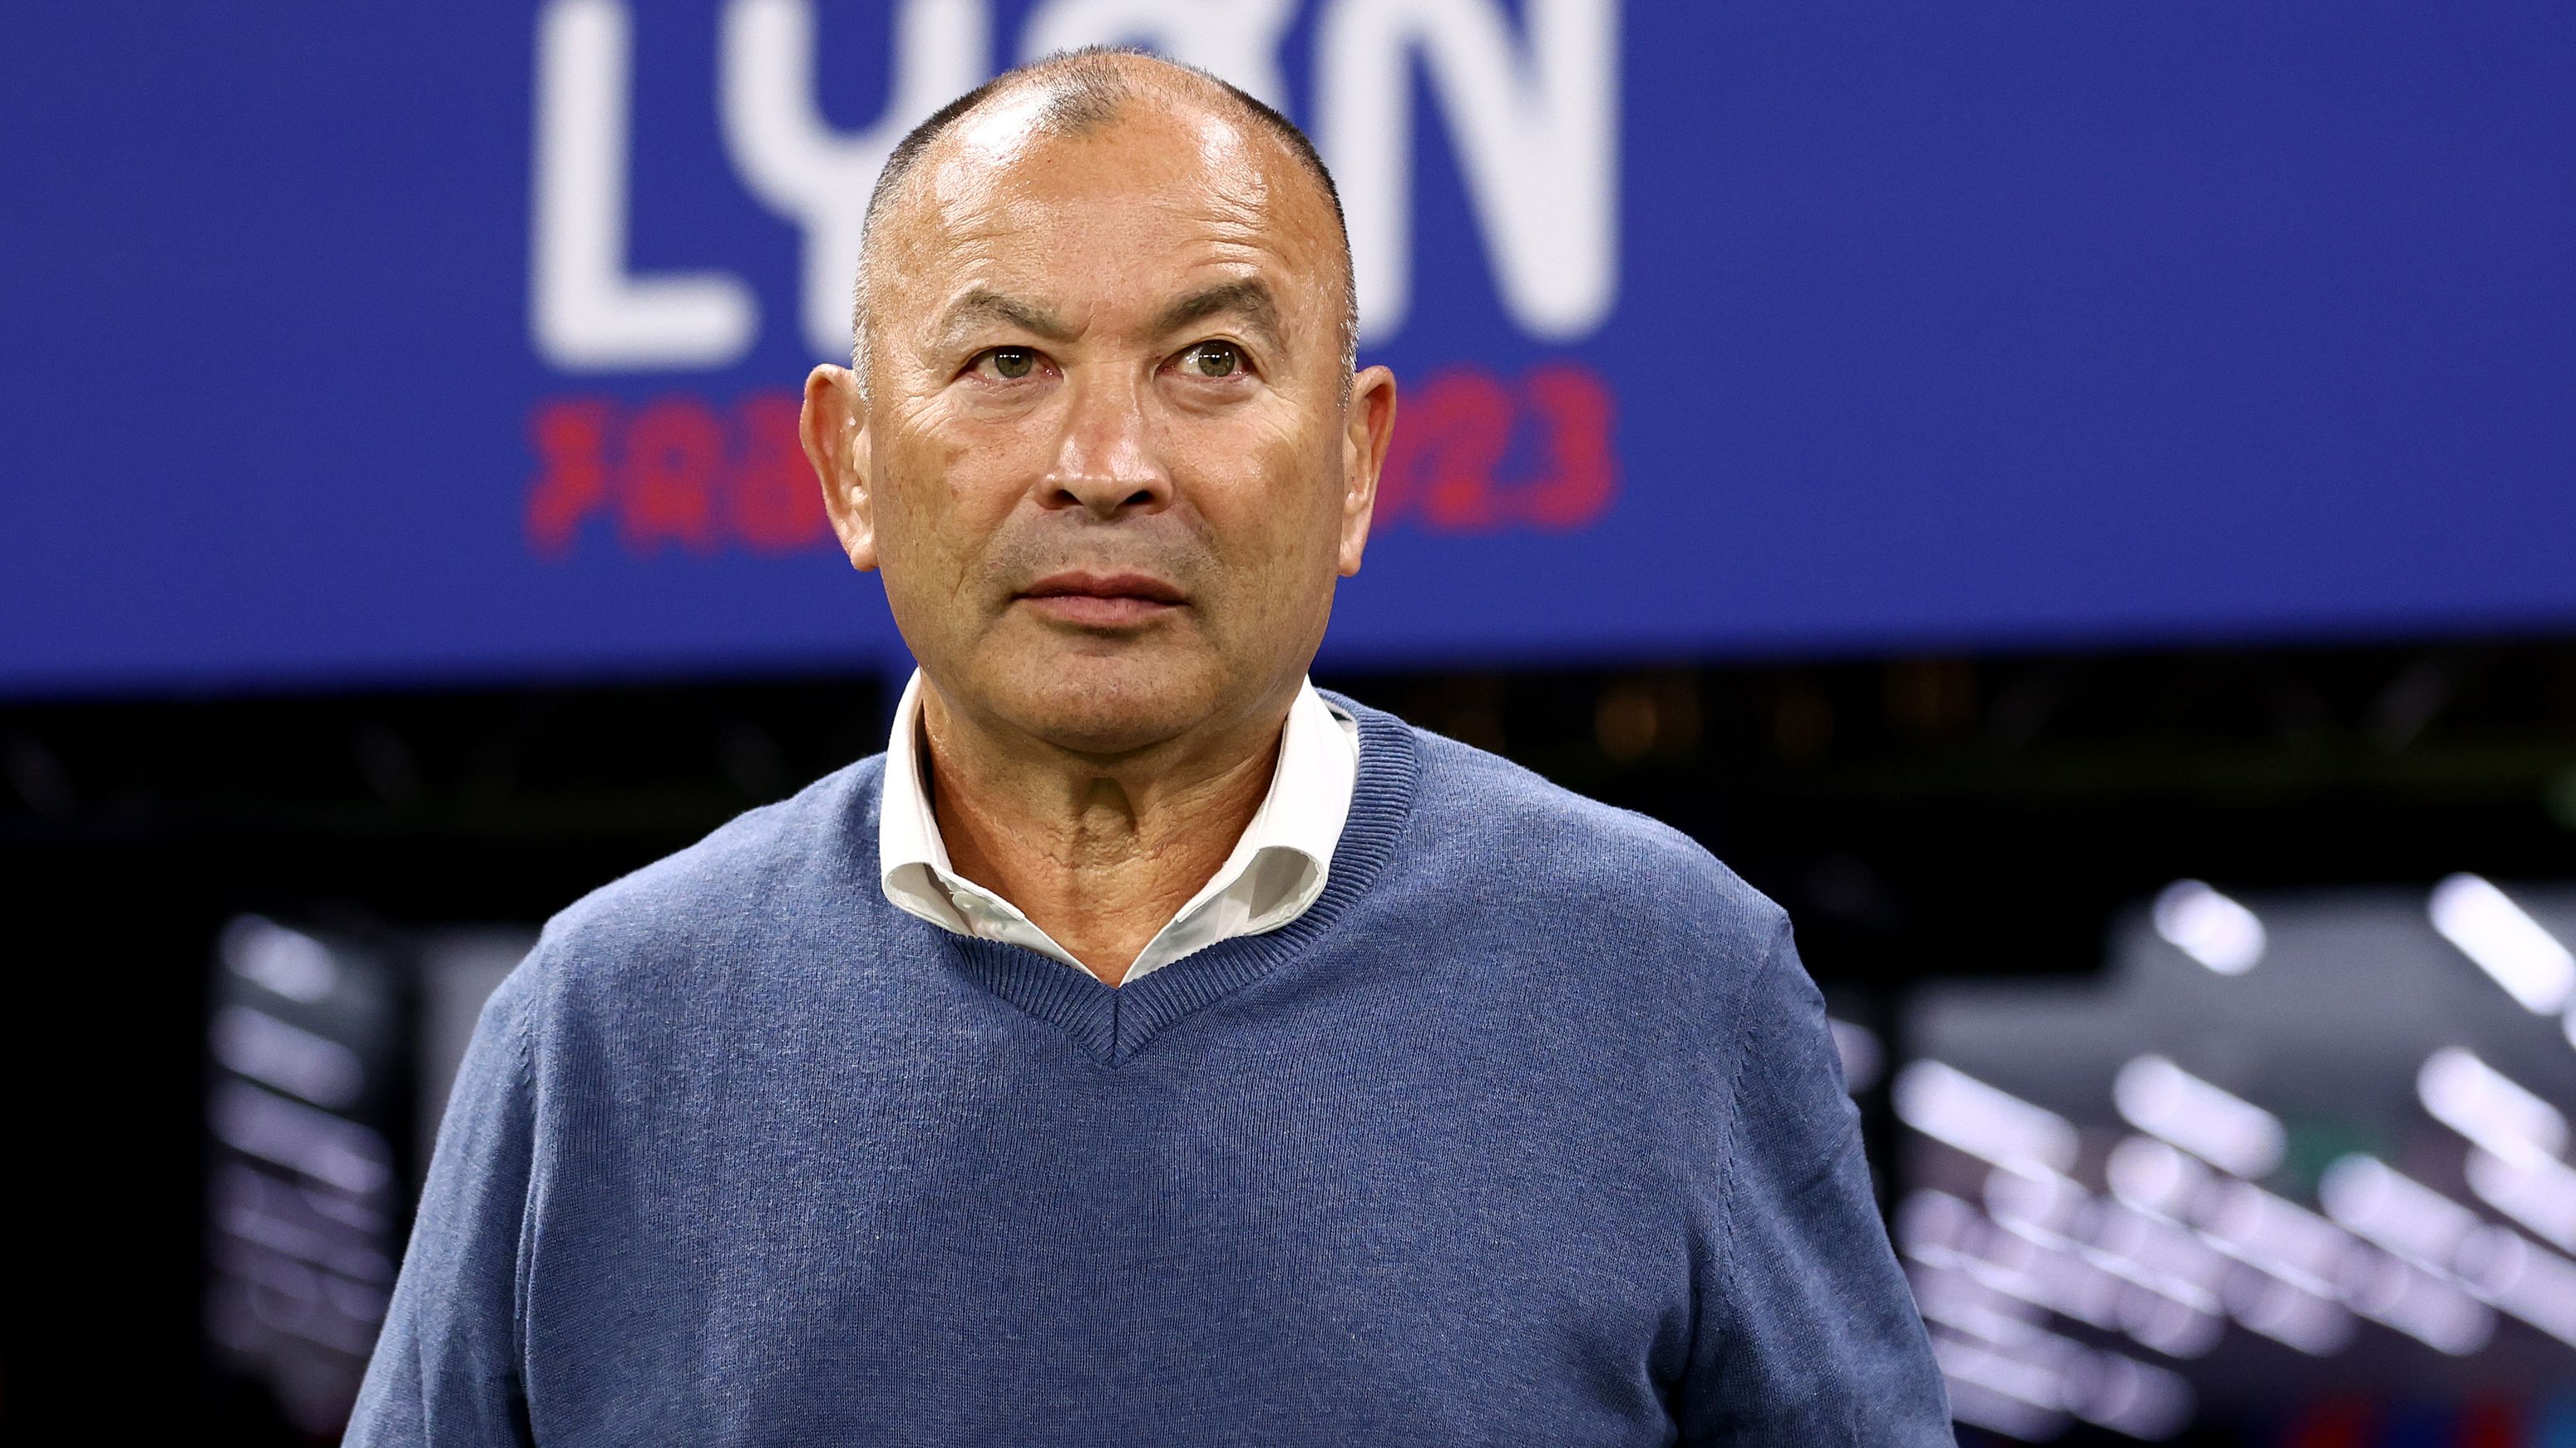 Eddie Jones, head cach of Australia, prior to the career-defining Rugby World Cup loss to Wales.